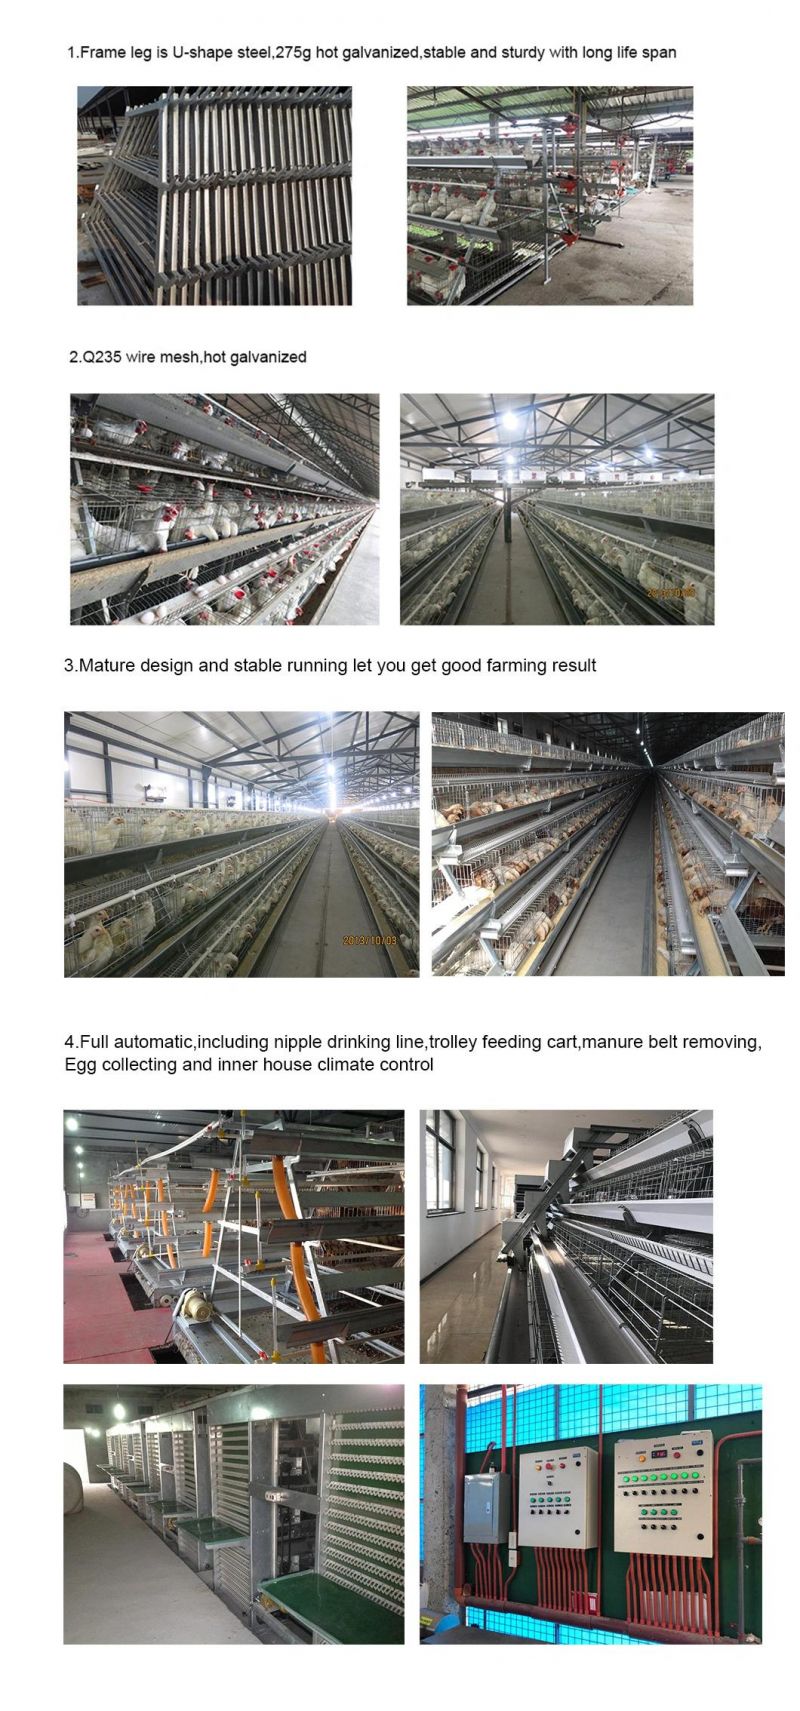 Longfeng 275g Hot Galvanized Wire Mesh and Sheet Factory Price Stable Running Layer Cage